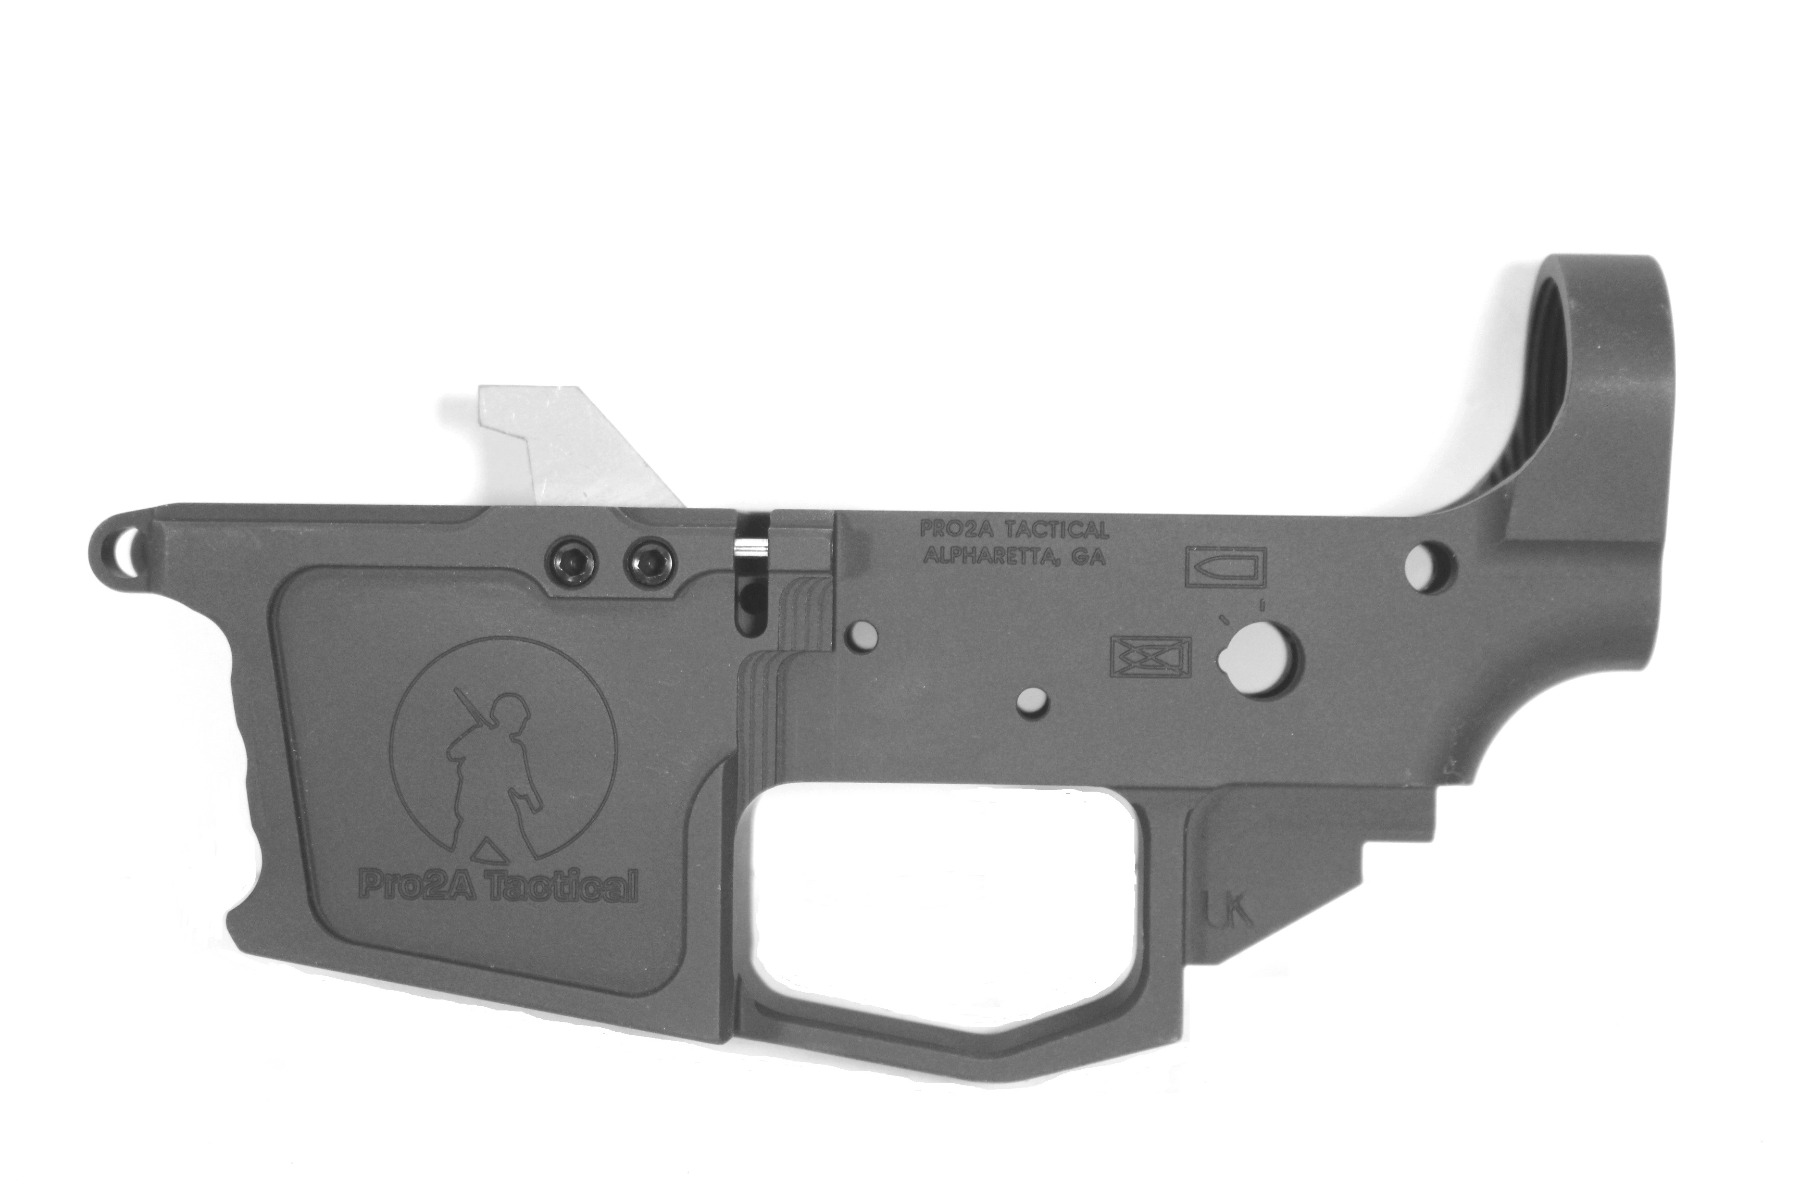 Pro2A Tactical's Pro2A 9mm/40 S&W AR-45 Stripped Billet Lower Receiver